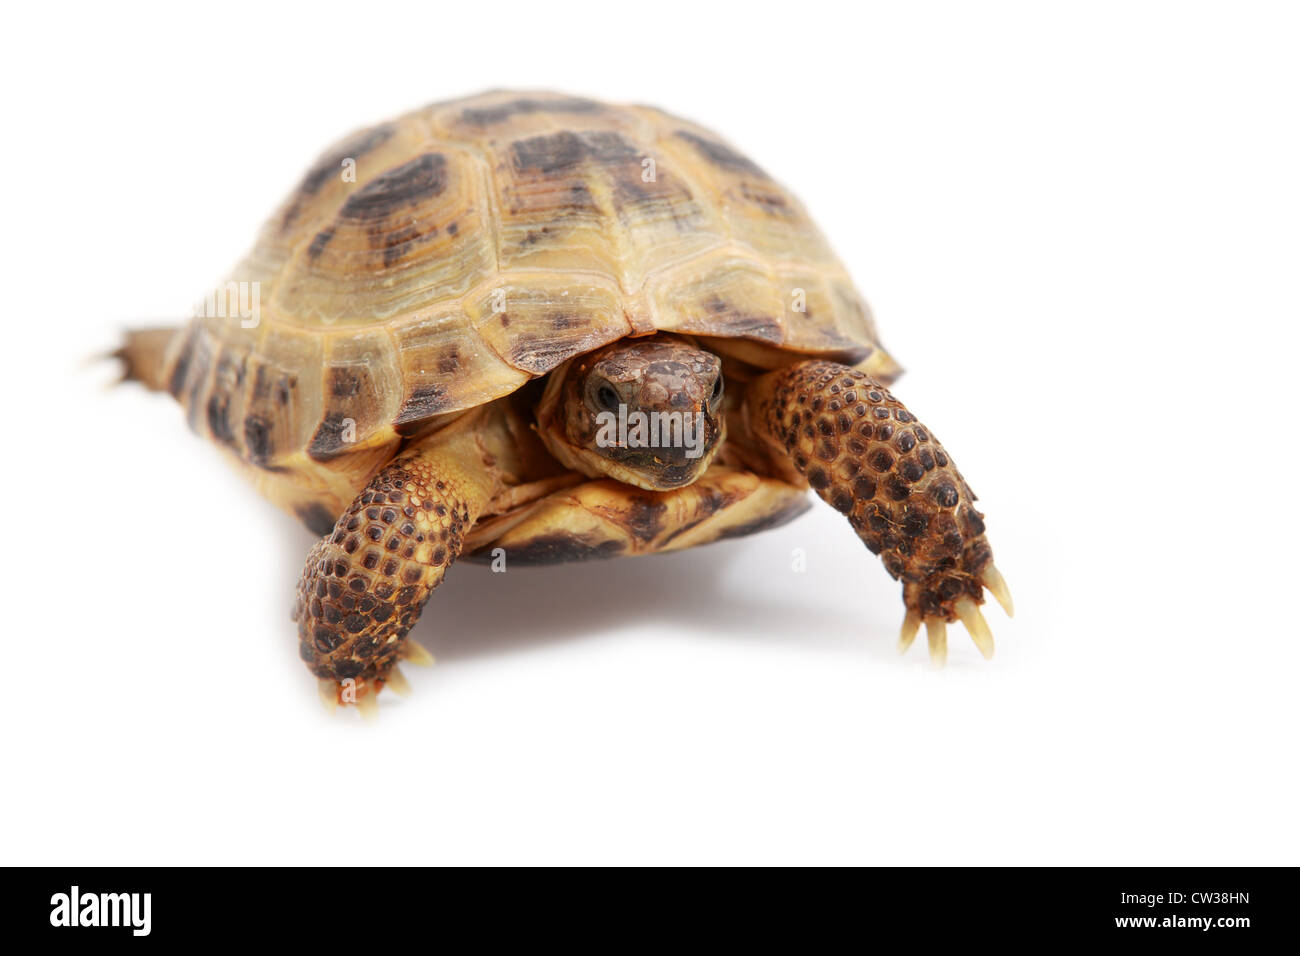 Russian tortoise, Horsfield's tortoise or Central Asian tortoise Agrionemys horsfieldii on white Stock Photo